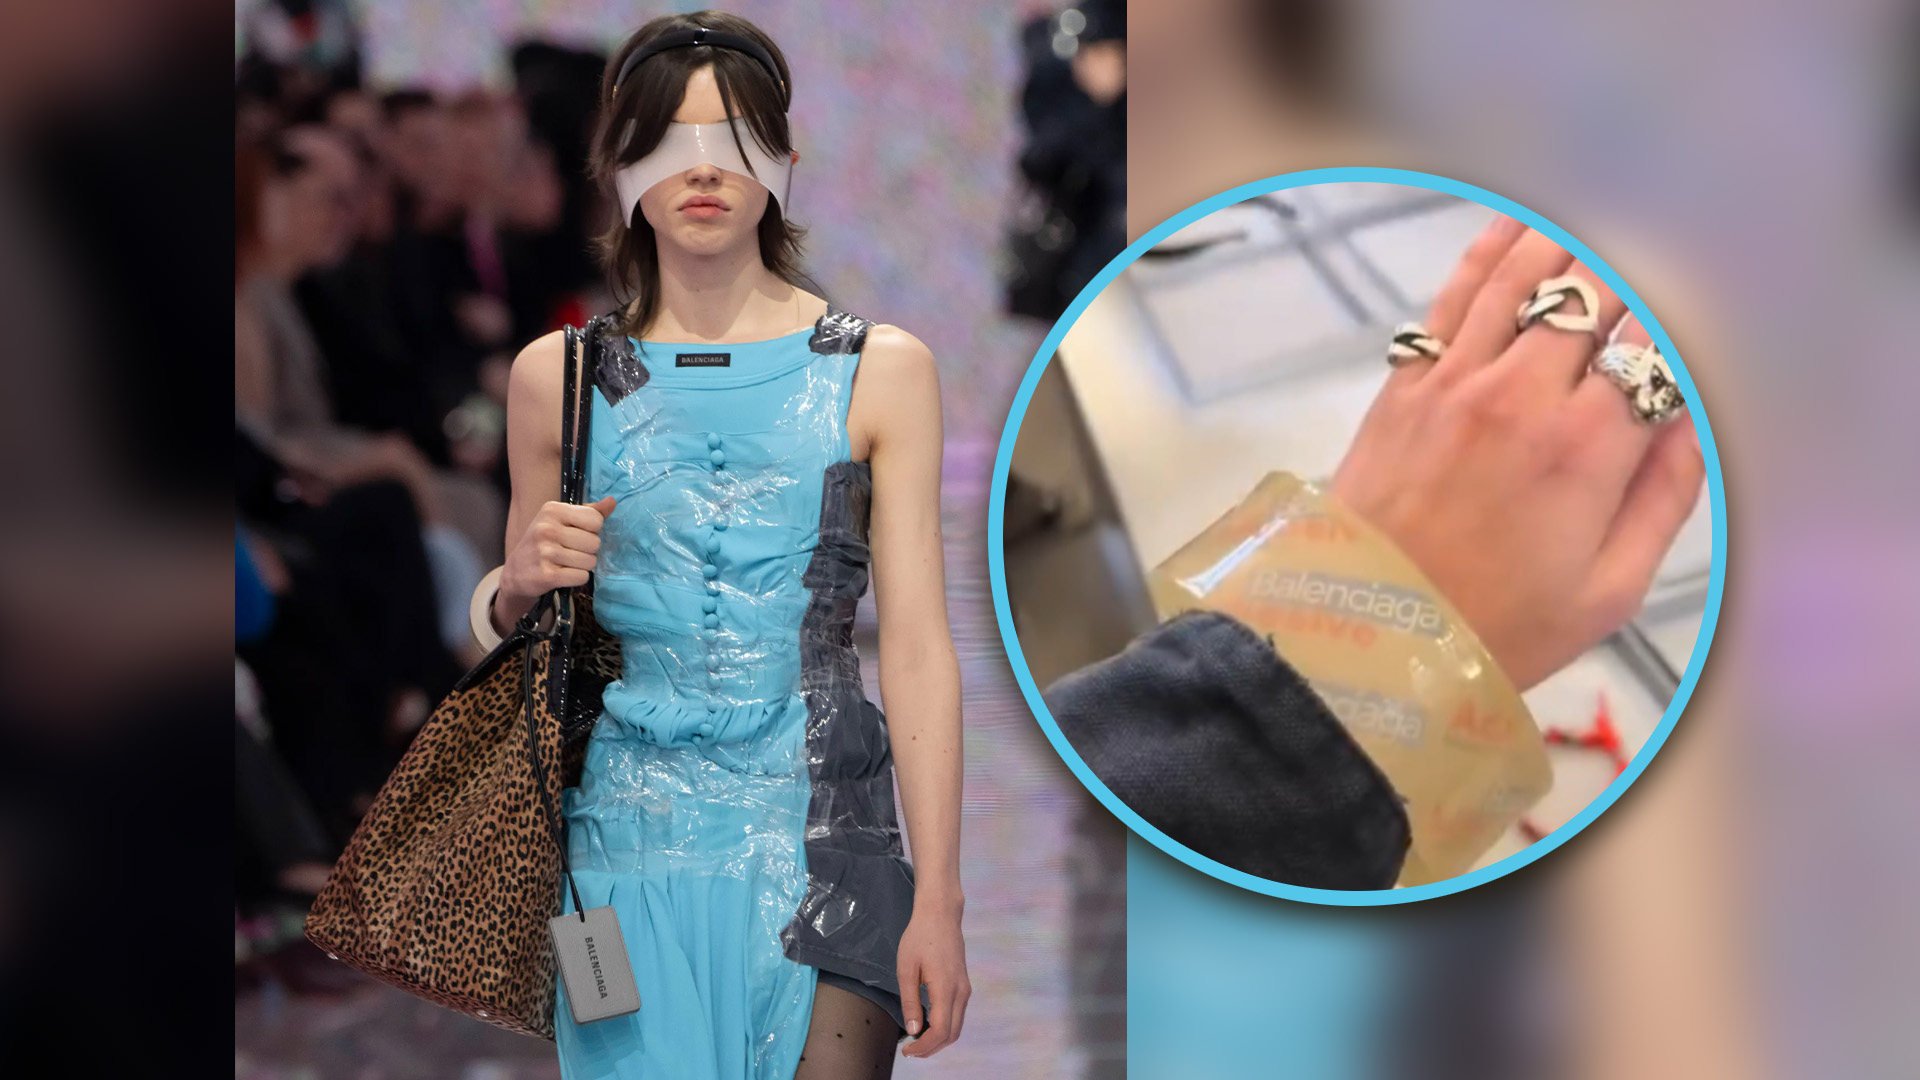 A US$3,300 “clear sticky tape bracelet” made by fashion brand Balenciaga and launched in Paris, is being ridiculed on mainland social media. Photo: SCMP composite/Douyin/Instagram